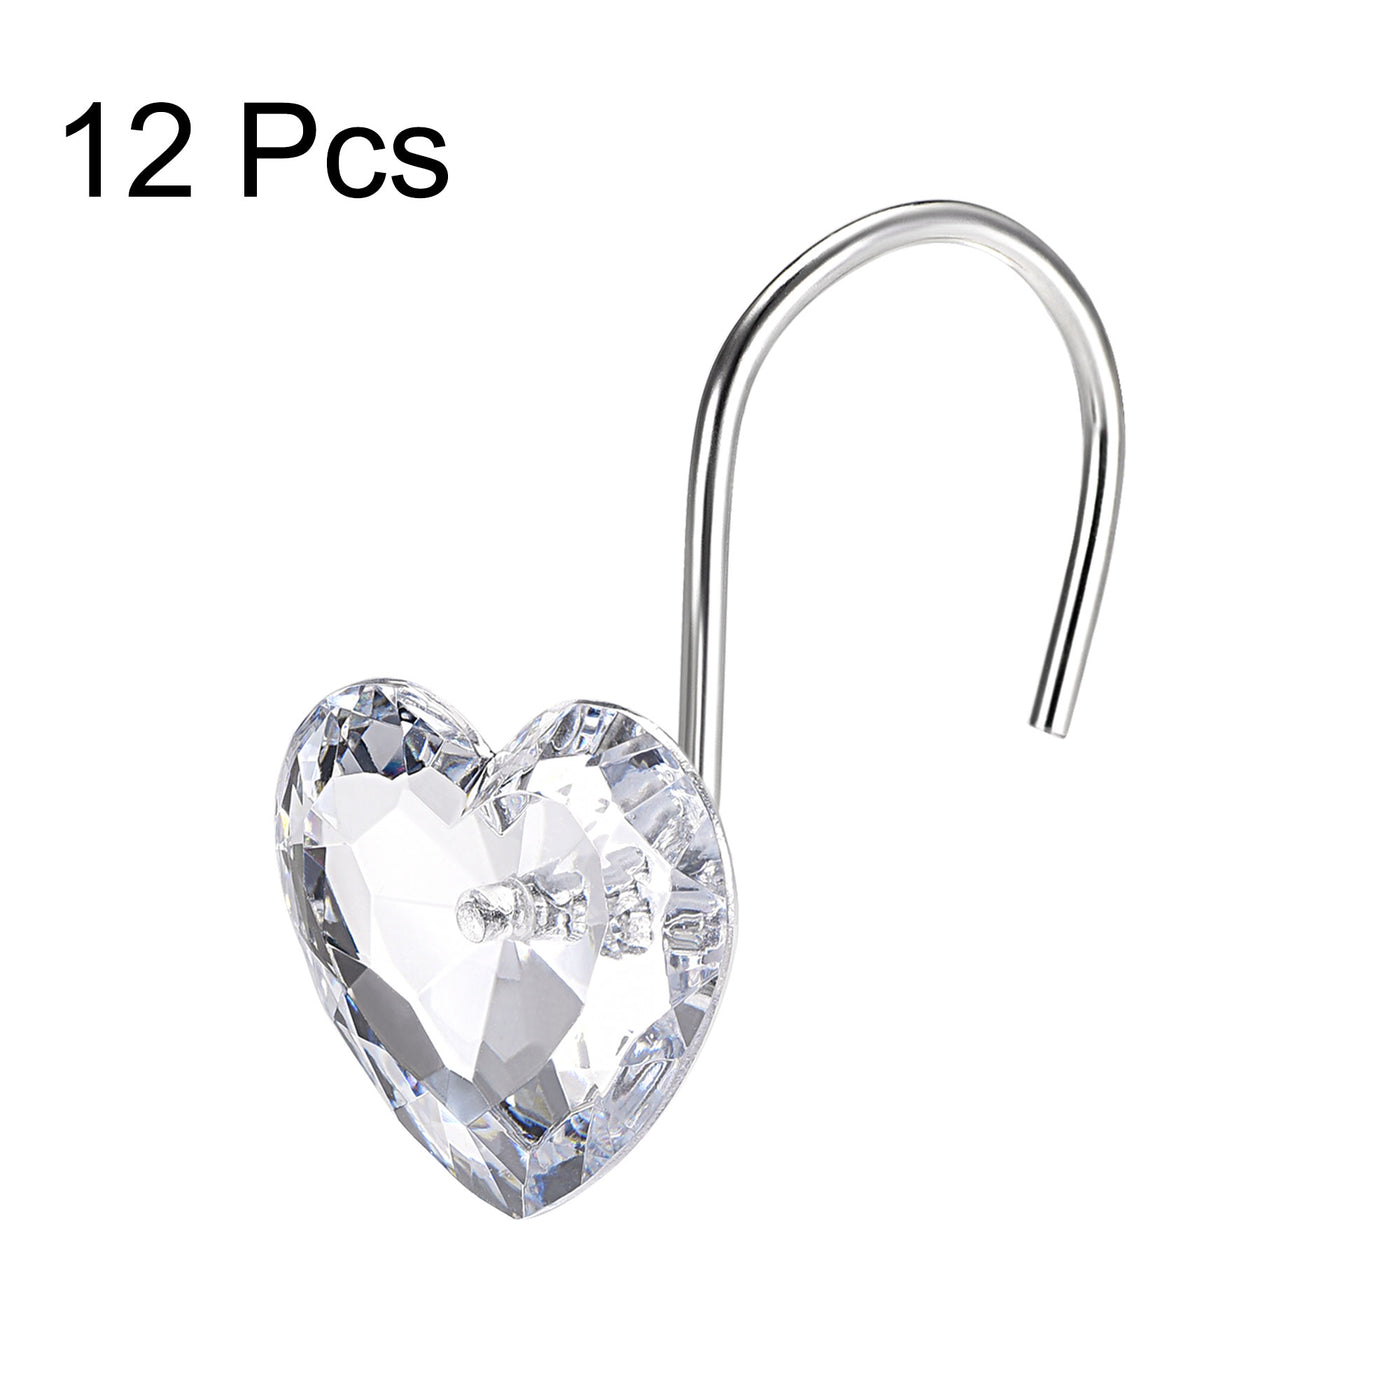 uxcell Uxcell Shower Curtain Hooks for Bathroom, Heart Shape Acrylic Curtain Rod Hangers, Home Decor Hook Rings Transparent 12Pcs